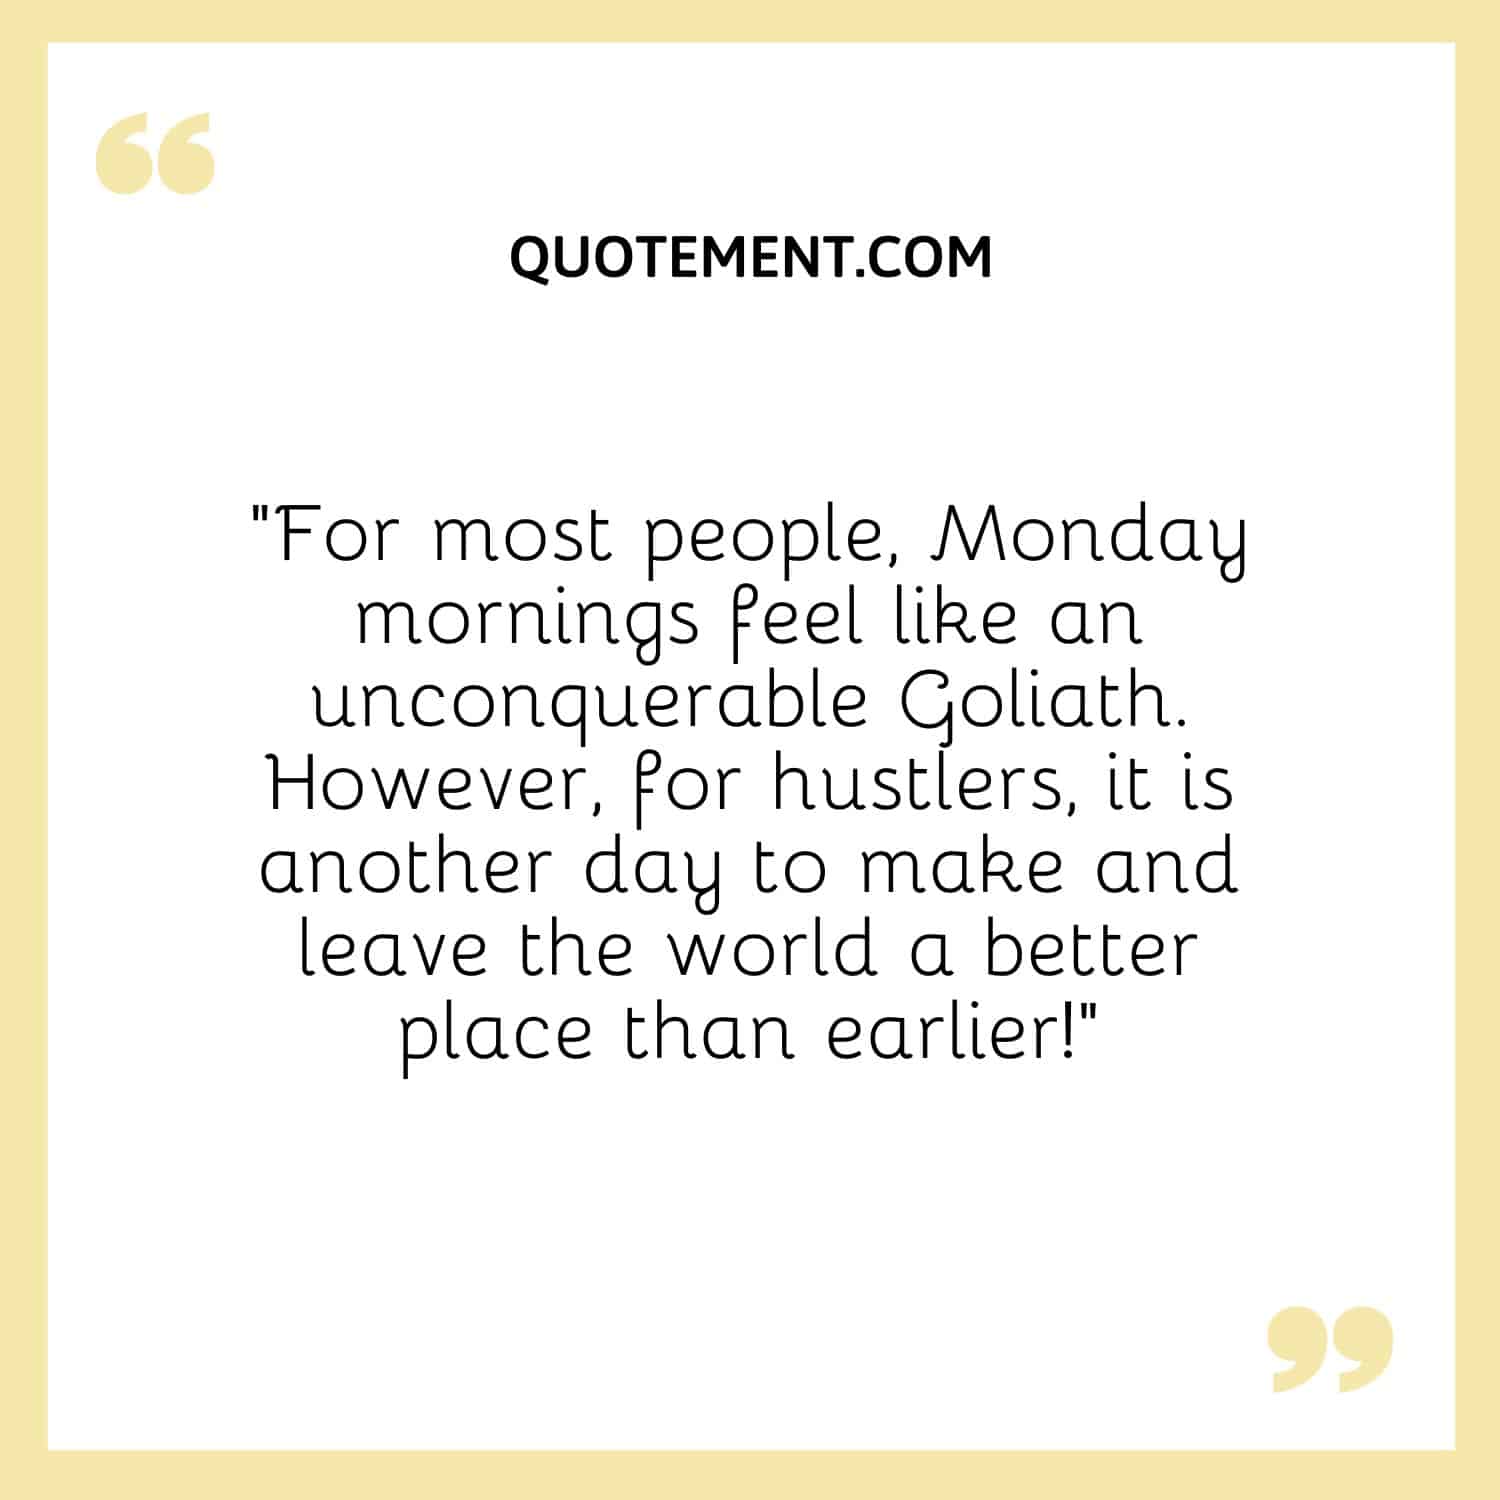 Monday mornings feel like an unconquerable Goliath